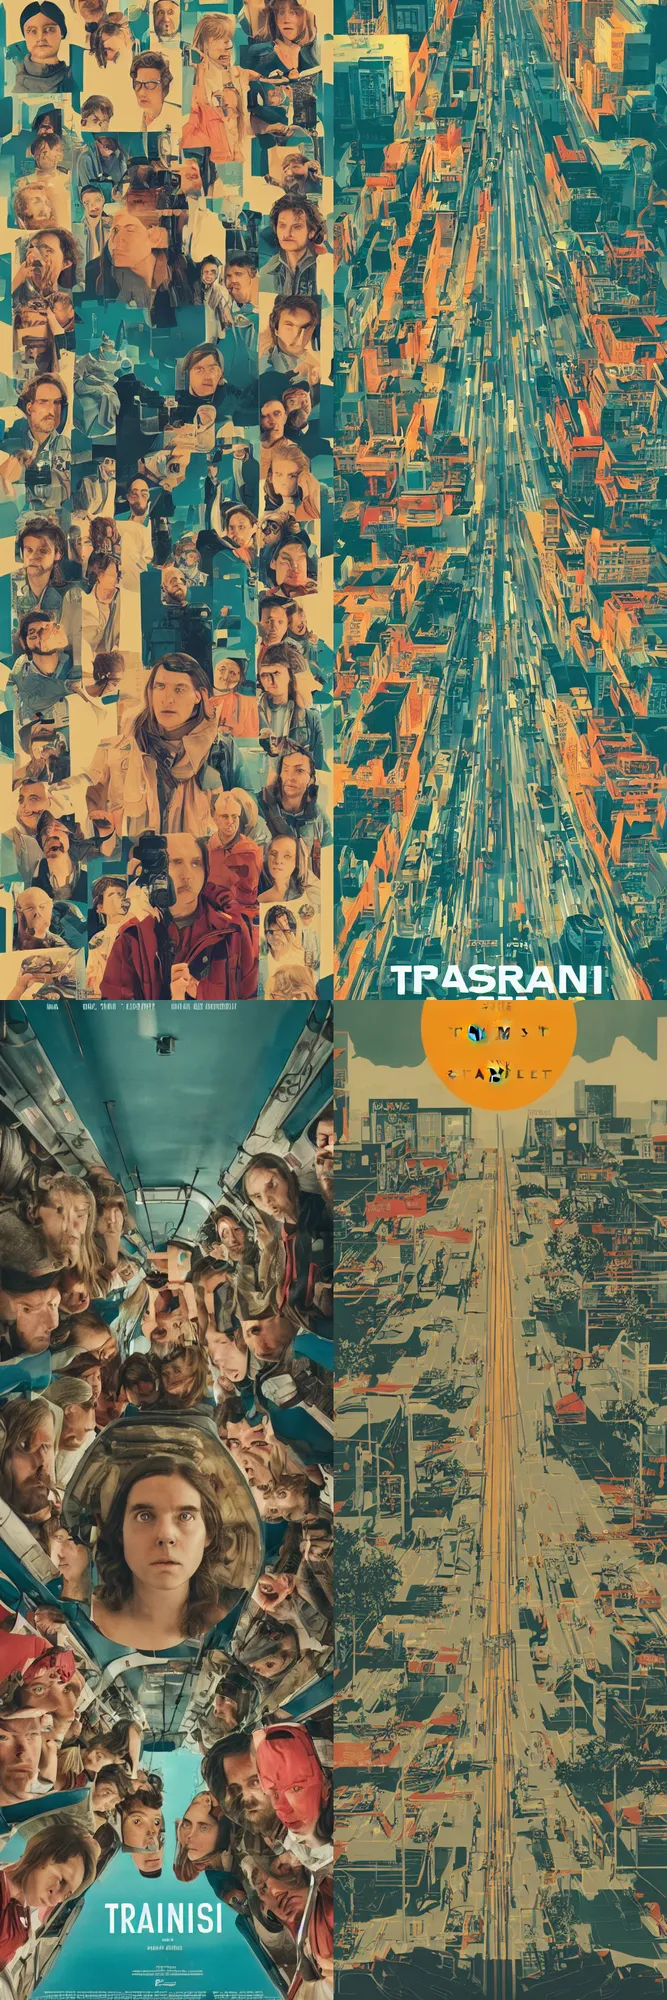 Prompt: Official Poster for Transit, sci-fi film directed by Wes Anderson starring Emile Hirsch, 4k print